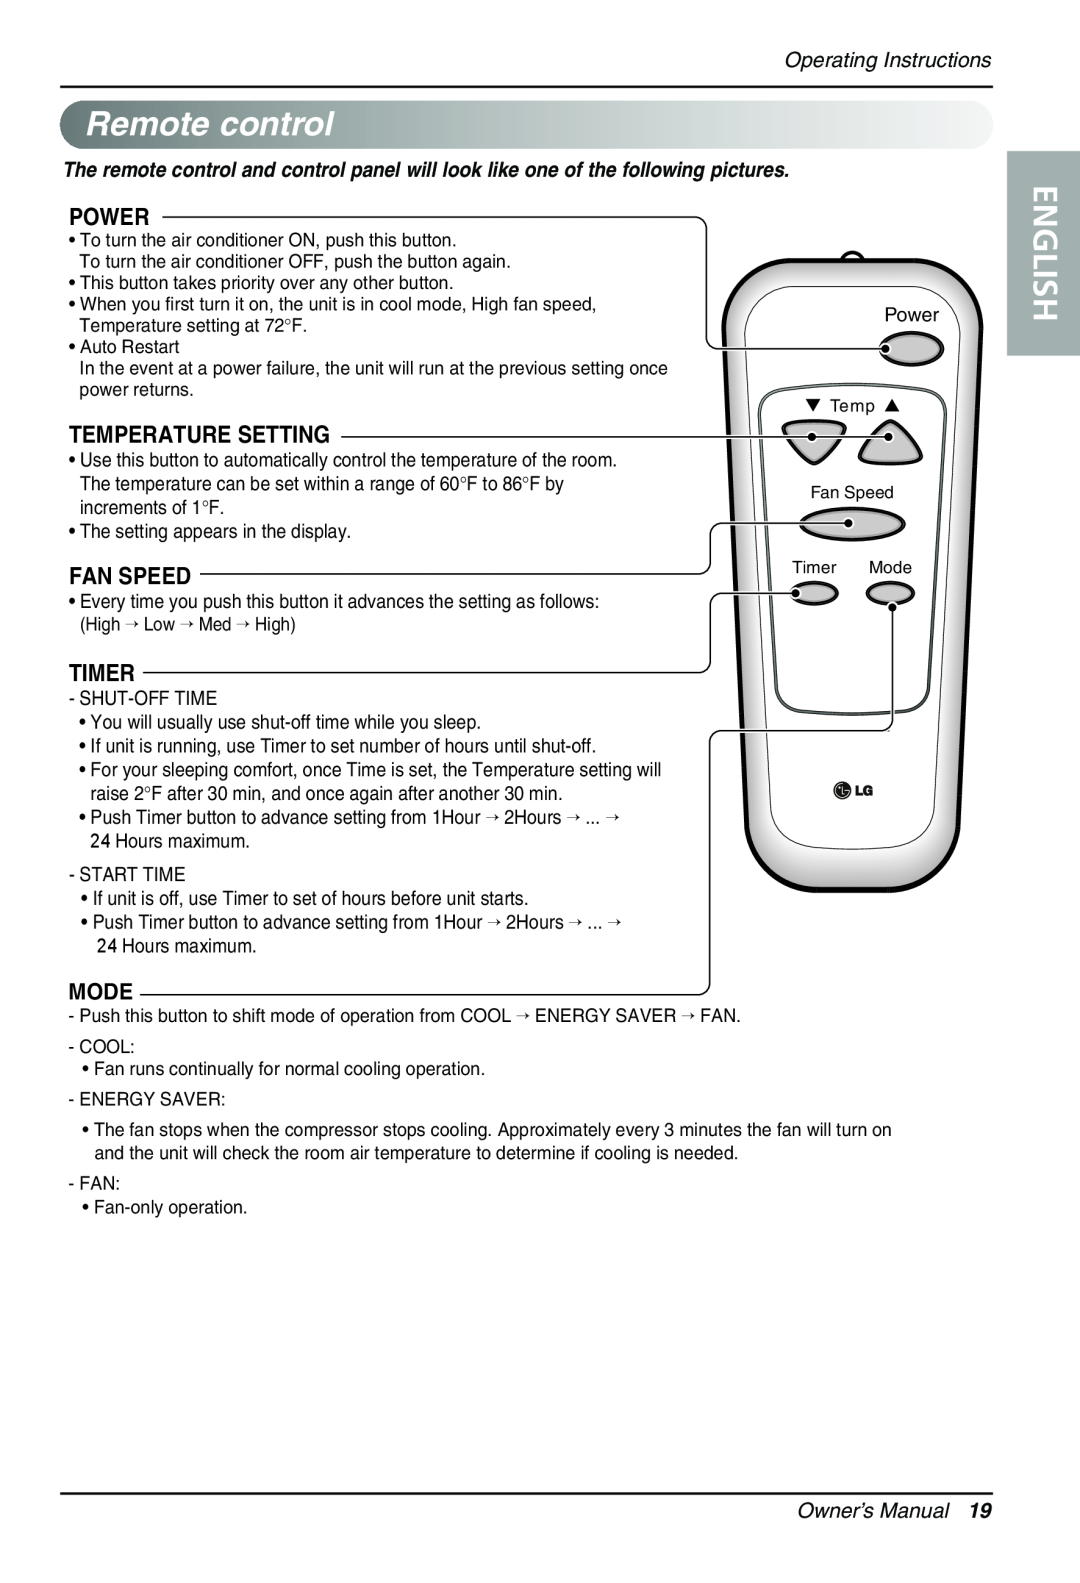 Sears LT103CNR, LT123CNR manual Remotecontrol, Power, Temperature Setting, Fan Speed, Timer, Mode, Operating Instructions 